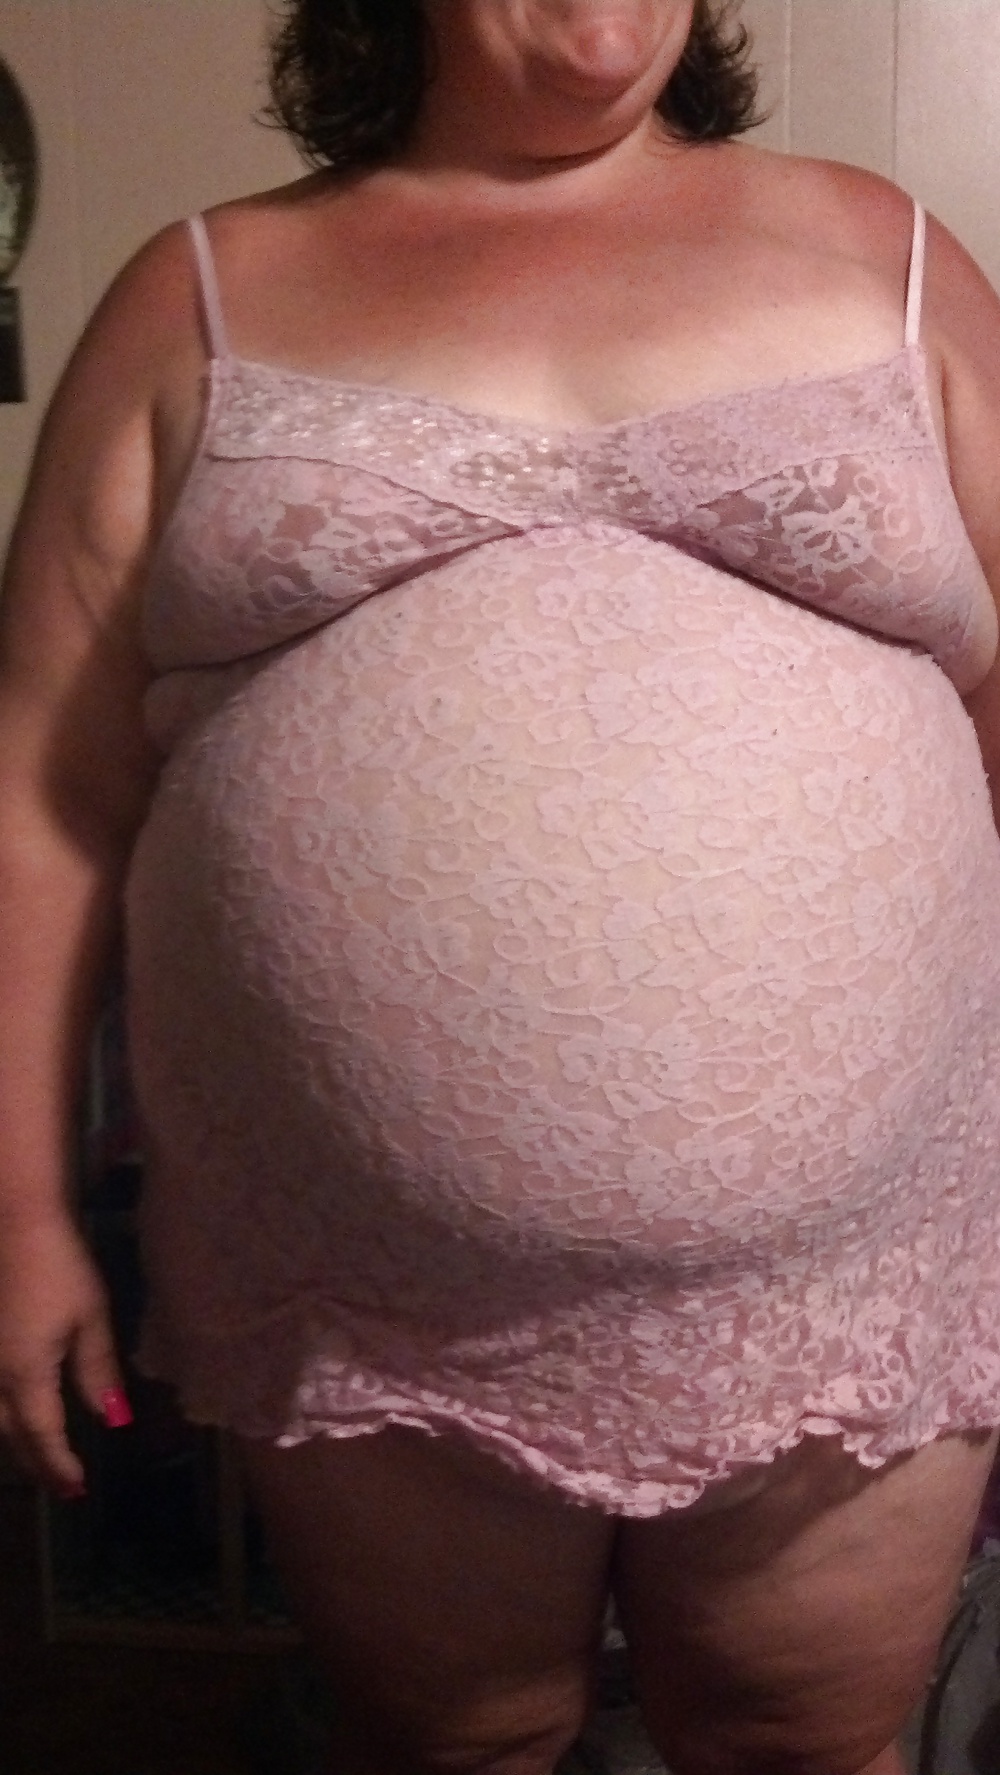 Some new Pictures of the Pregnant Wife porn gallery